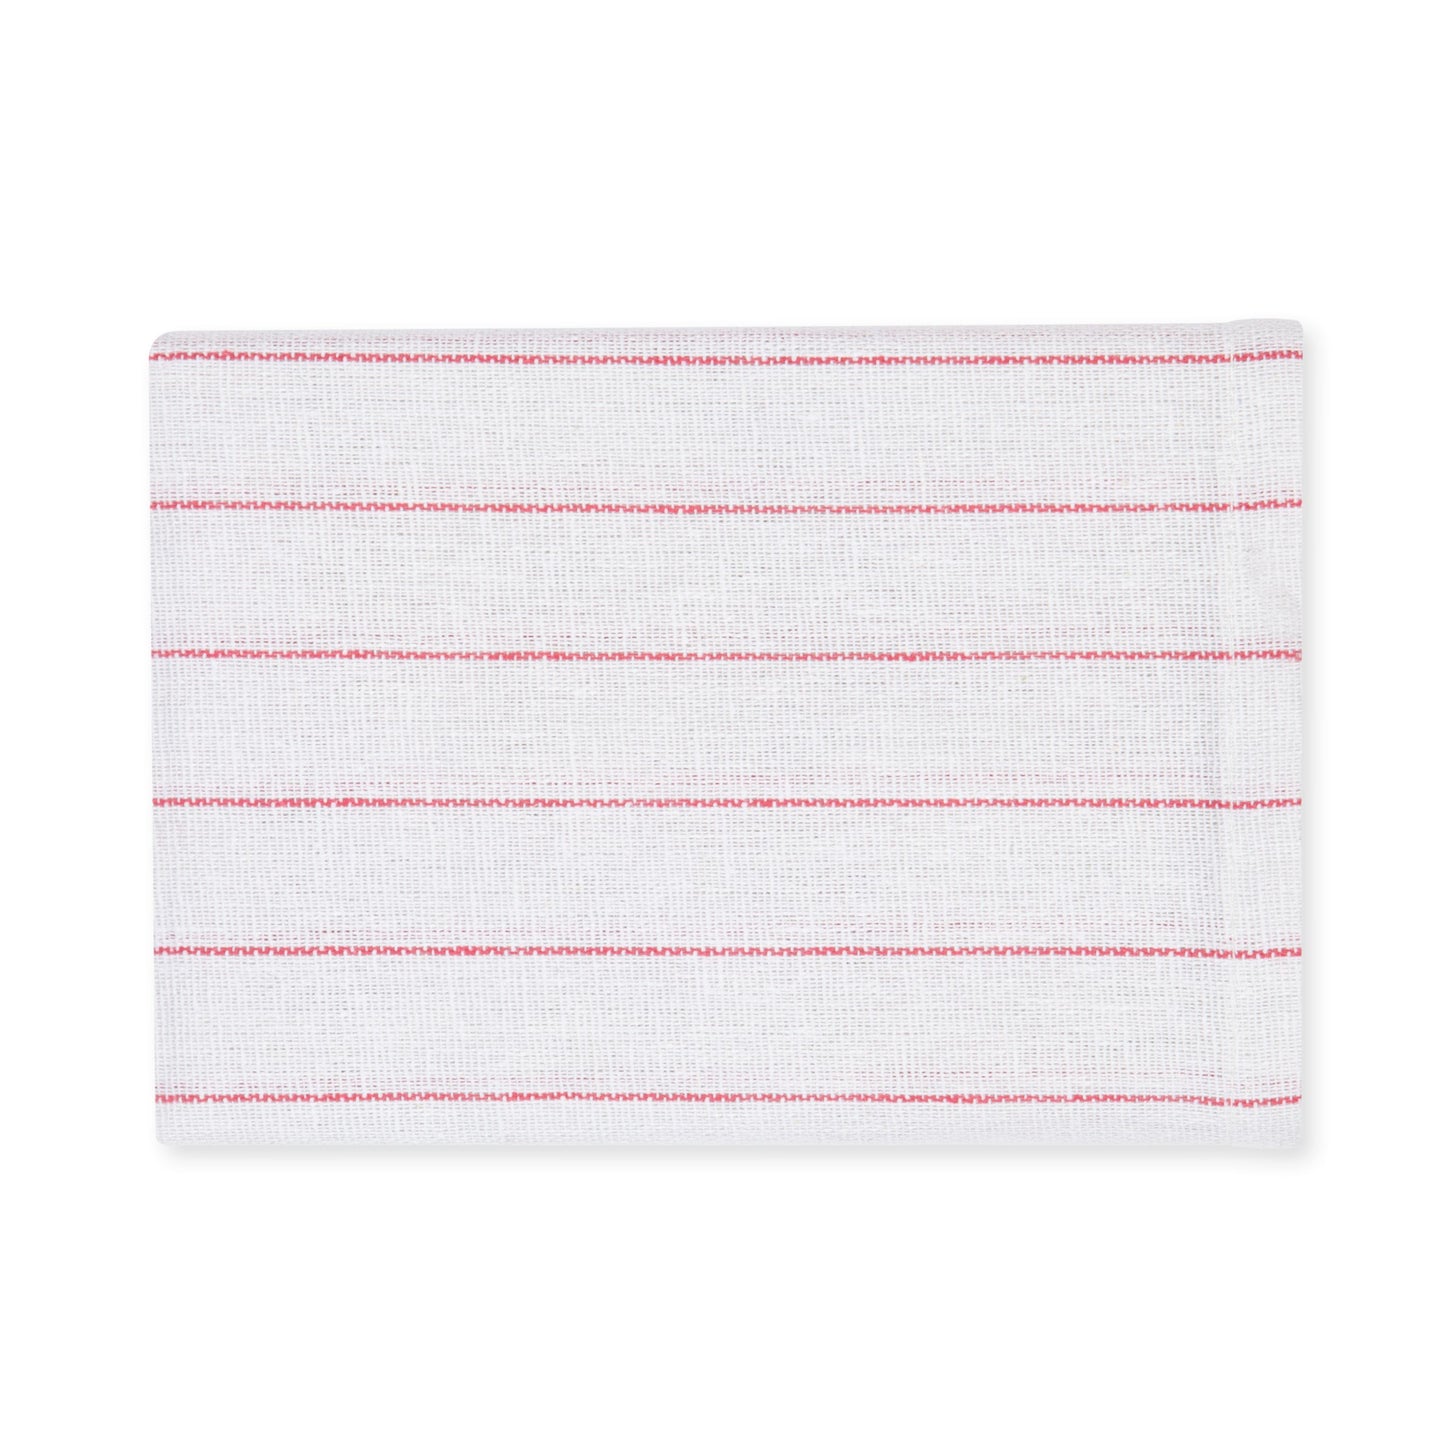 Glass Towel, 16x28 inch, White with Red Stripes